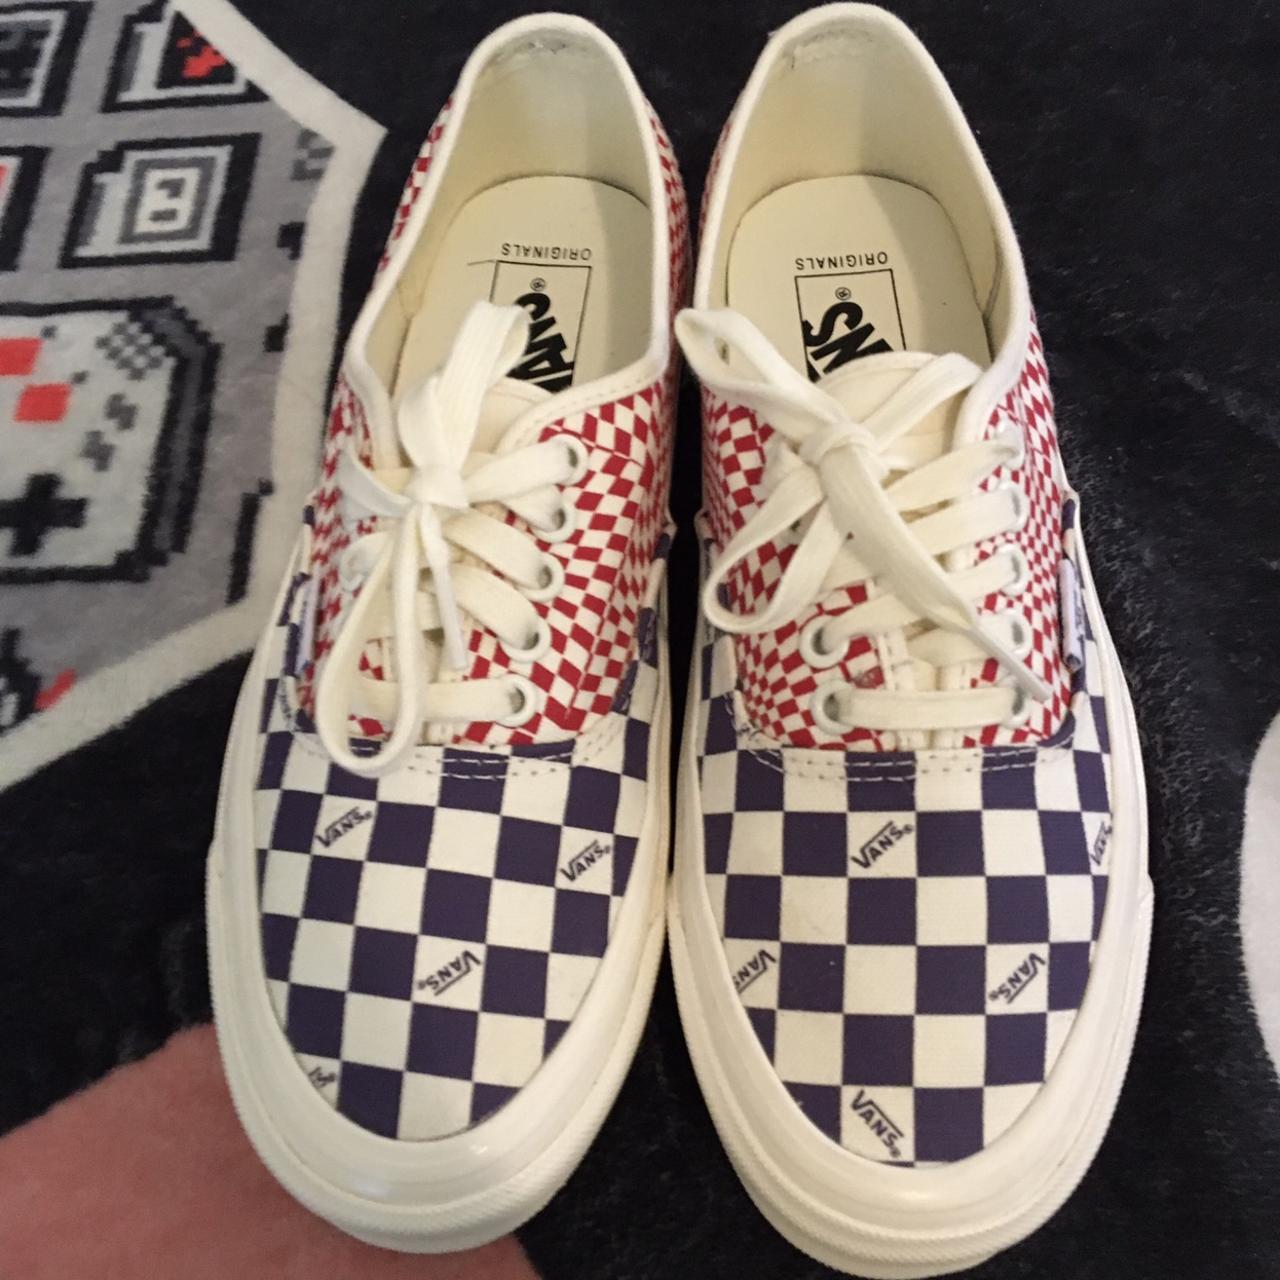 🍓 Og authentic lx red & navy Vans 🫐 These shoes are... - Depop